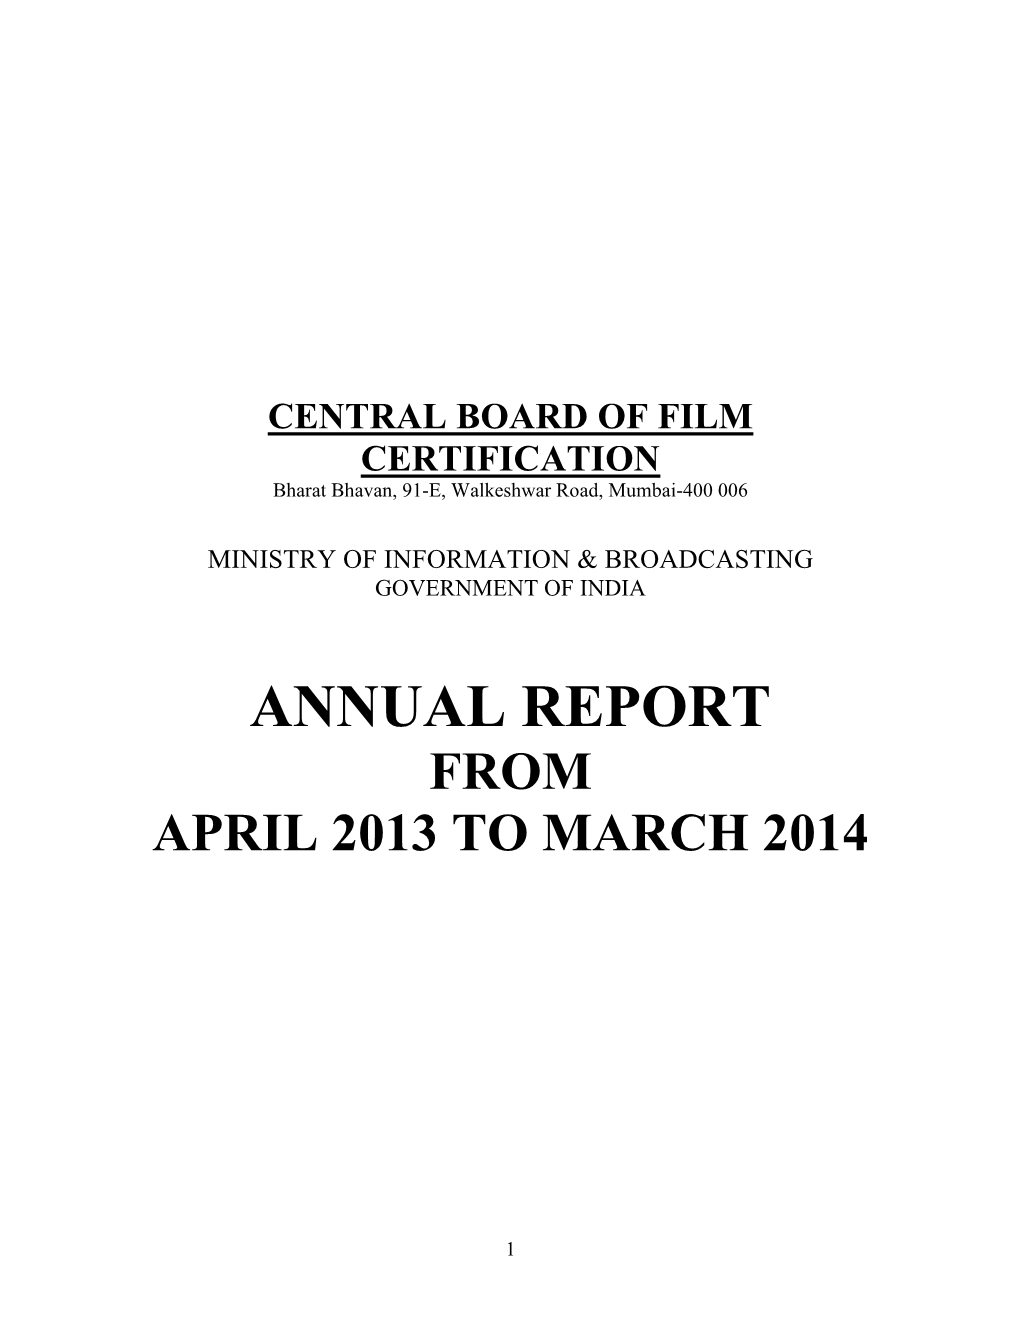 Annual Report from April 2013 to March 2014